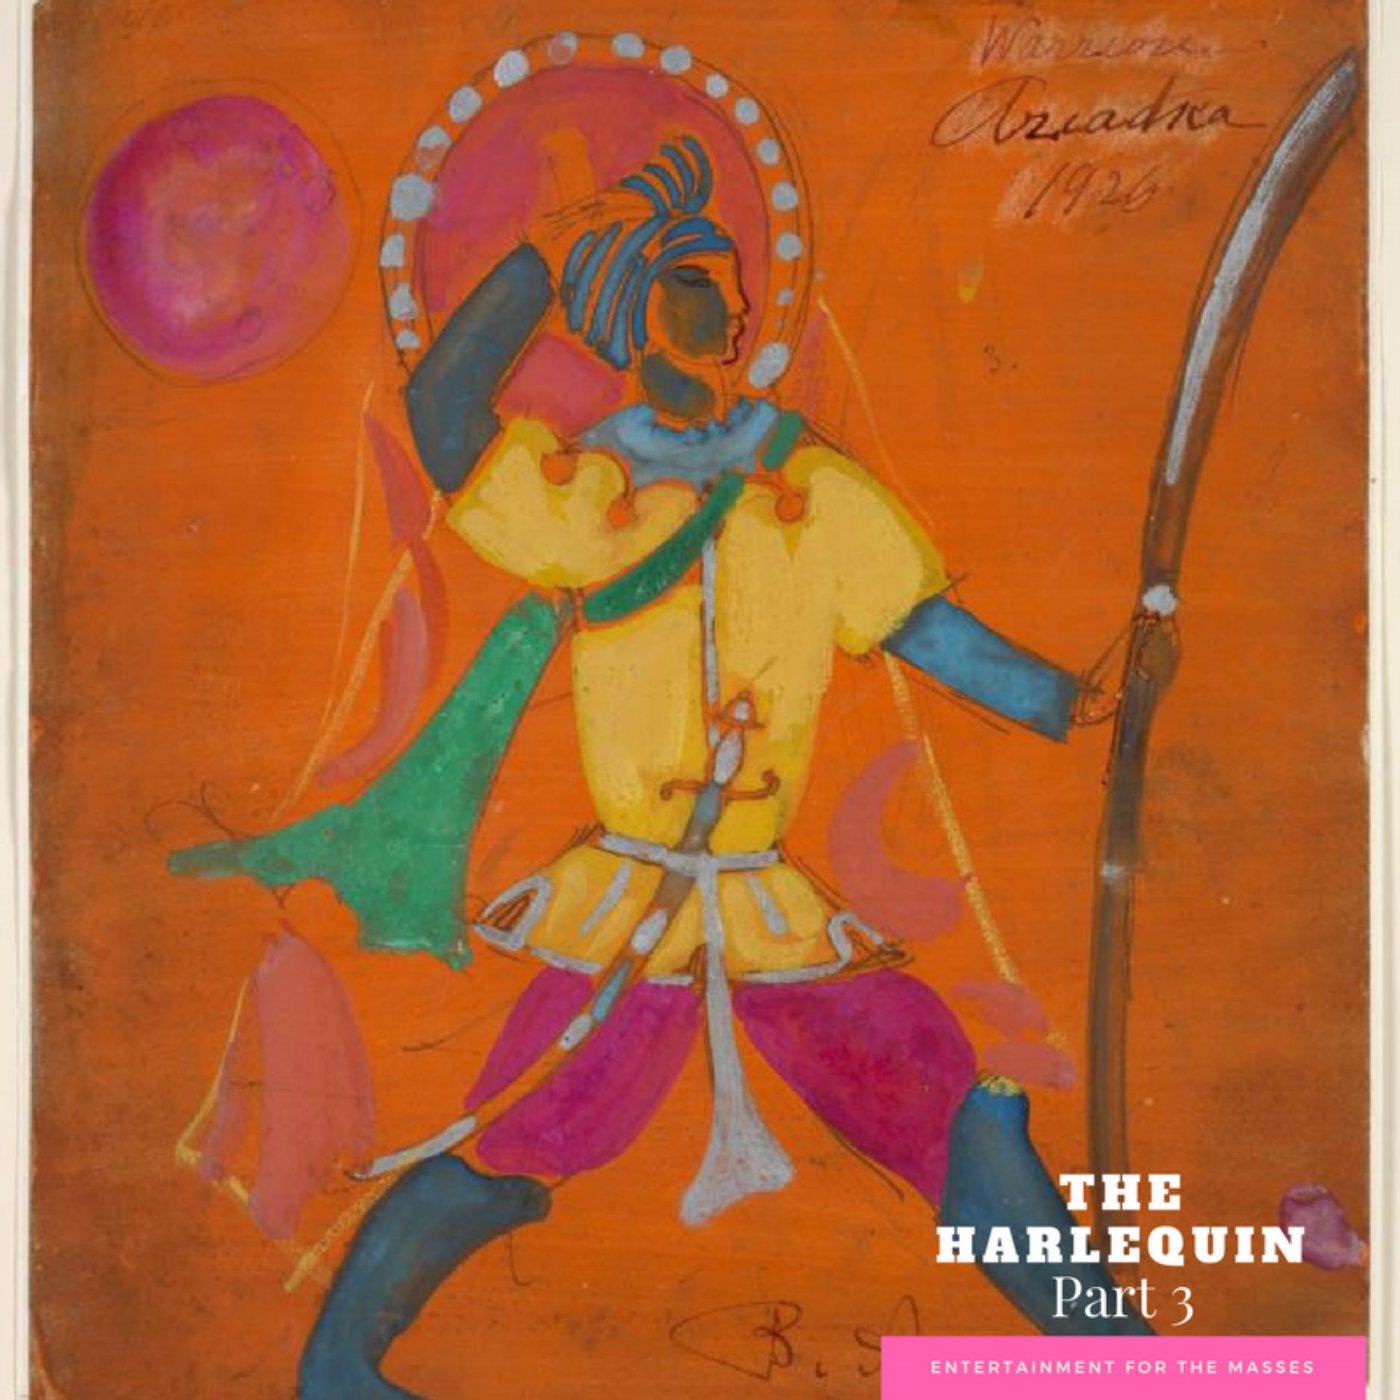 The Harlequin Part 3